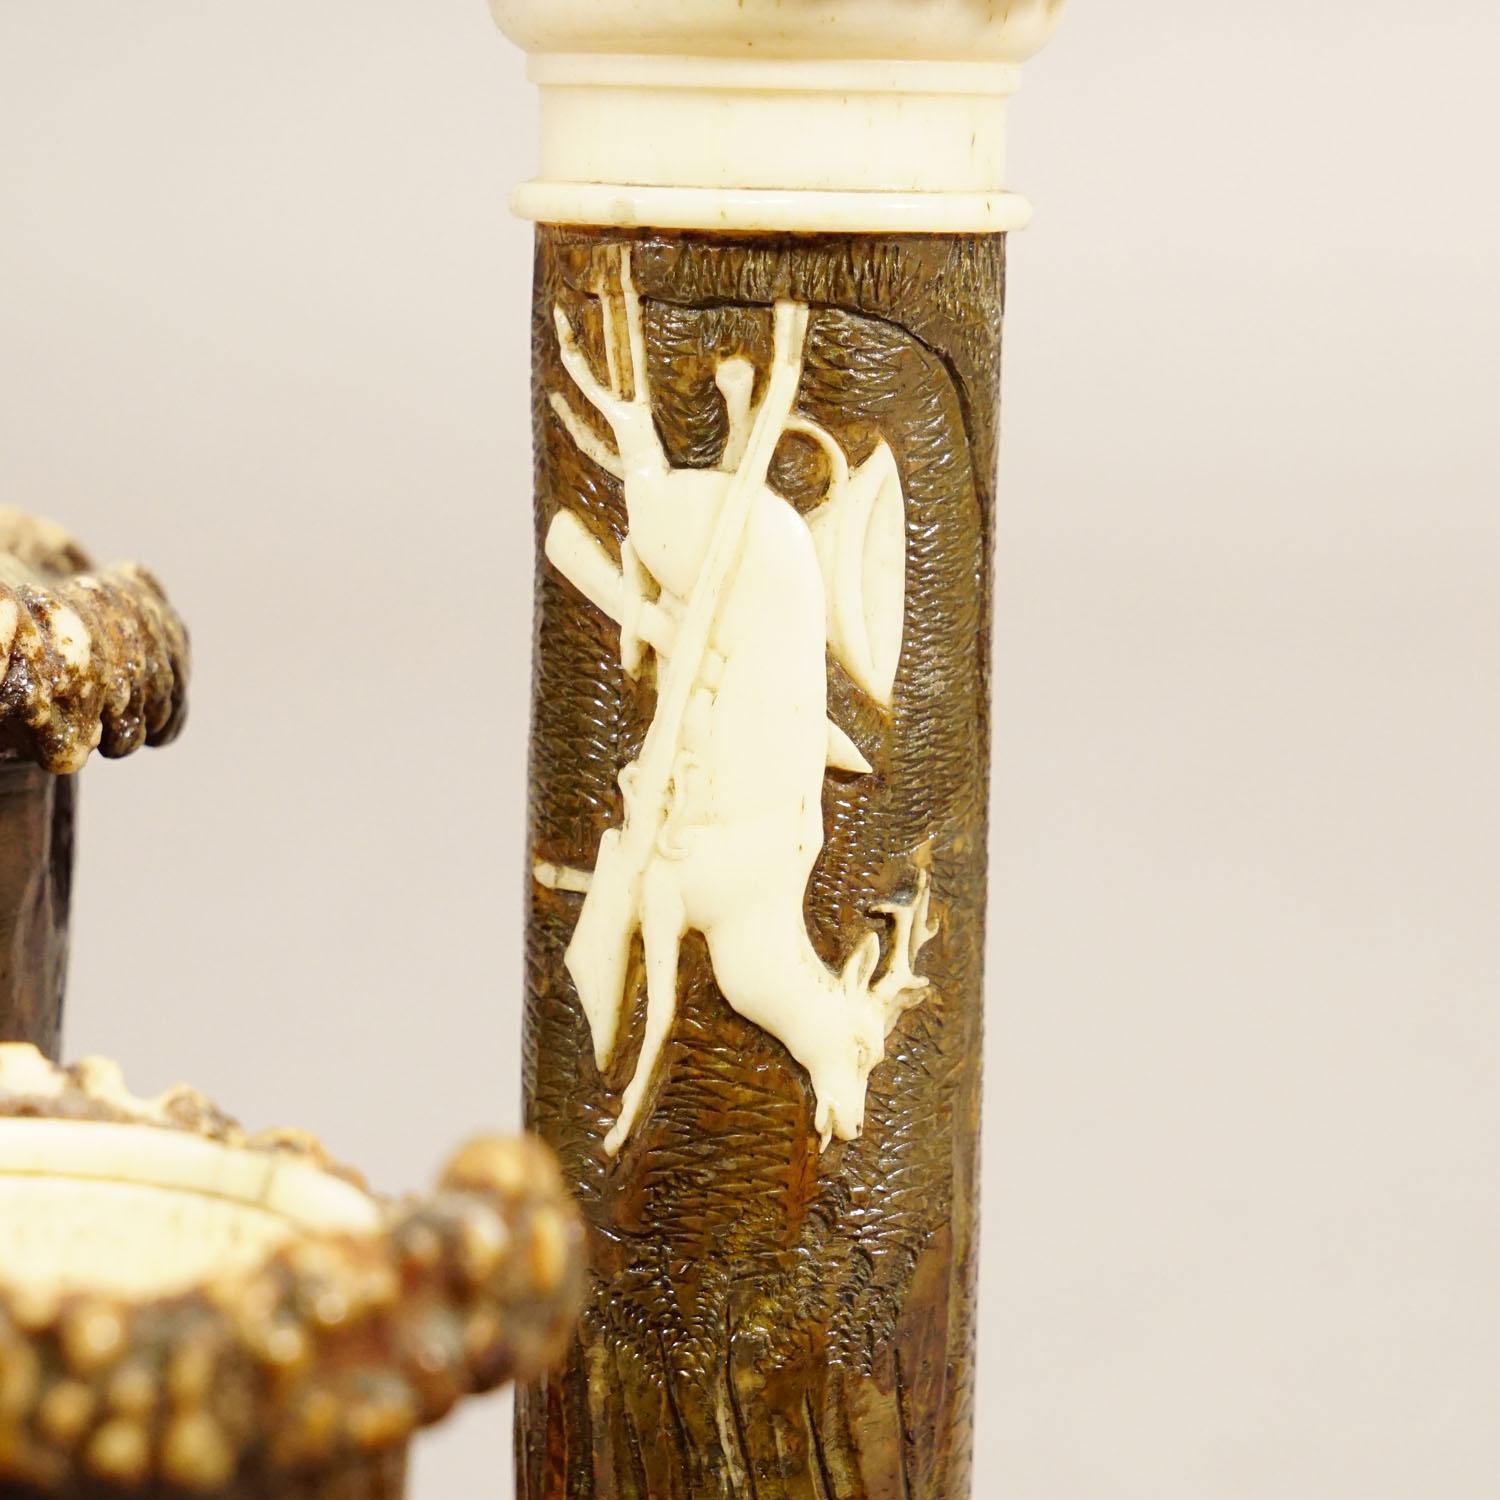 Rare Antler Desk Standish with Elaborate Carvings, Germany ca. 1840 For Sale 4